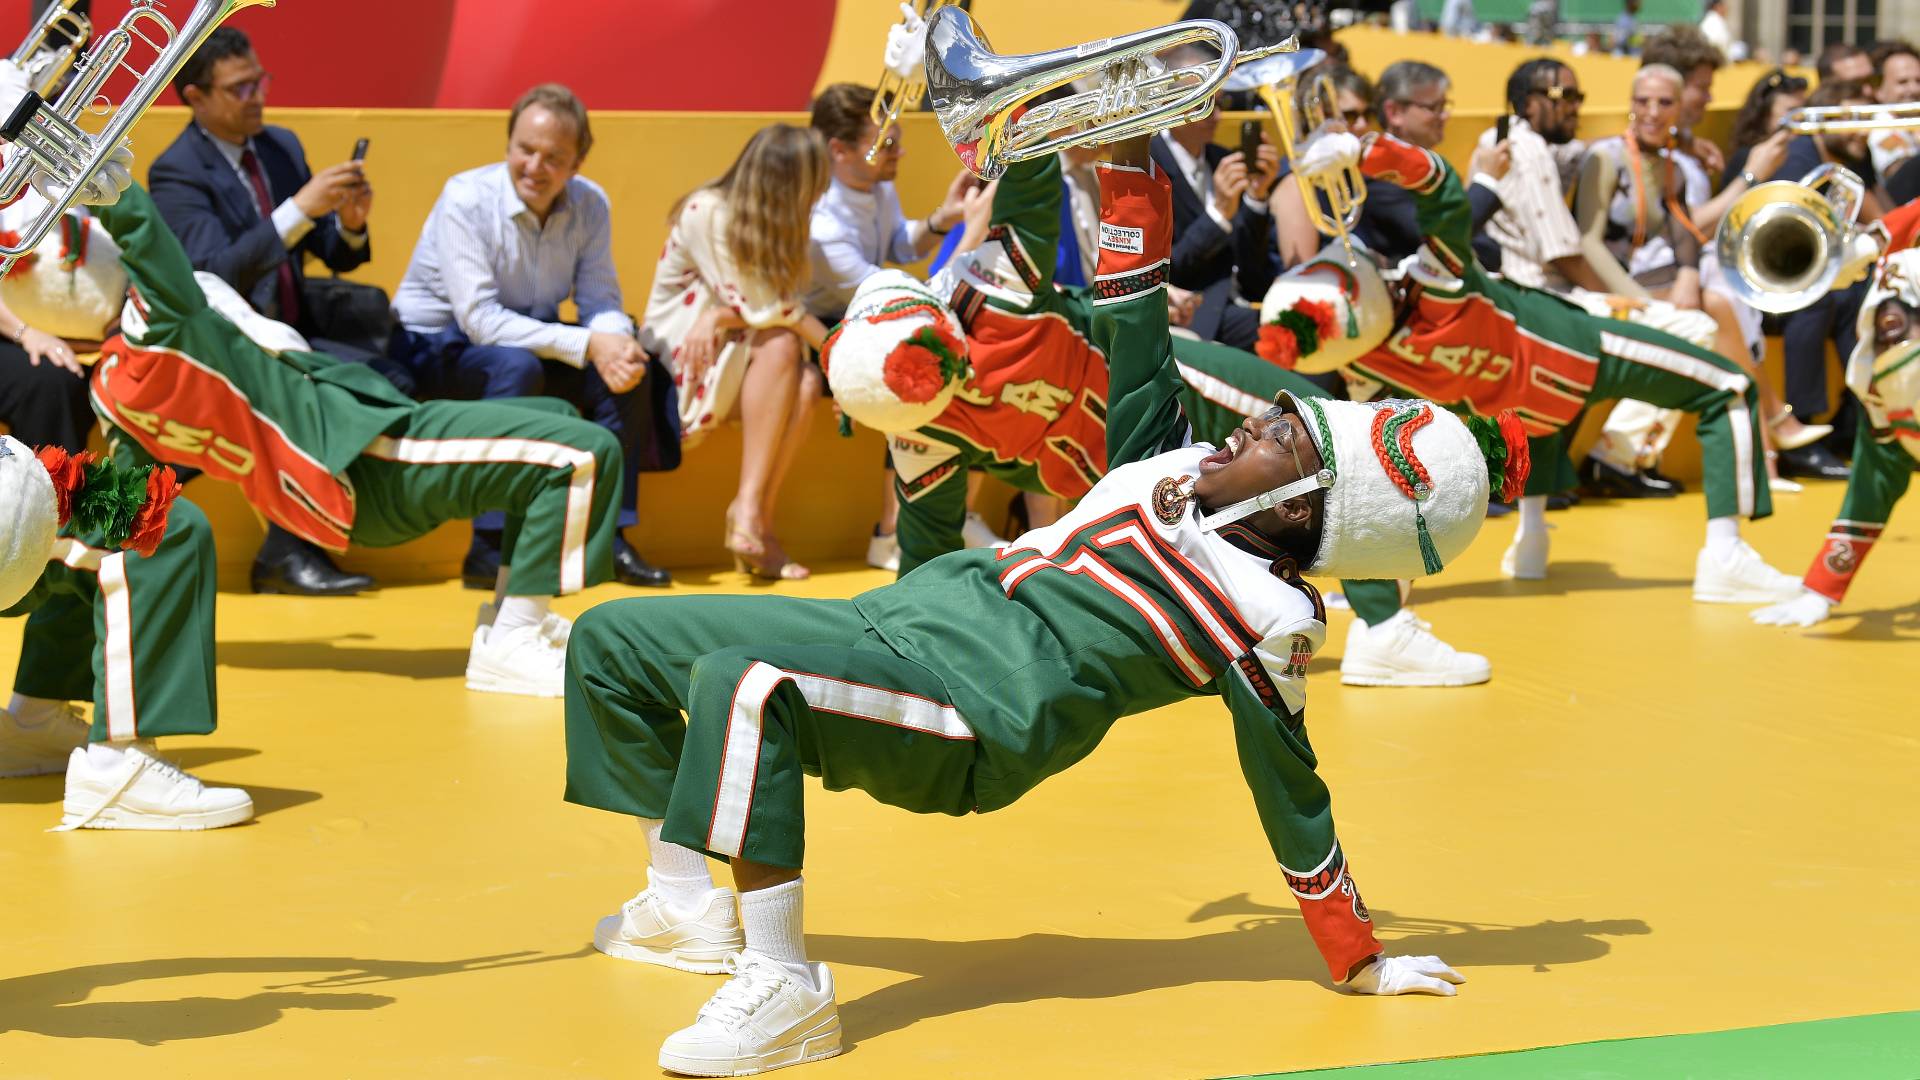 FAMU’s Marching "100" perform on the runway during the Louis Vuitton Menswear Spring Summer 2023 show as part of Paris Fashion Week on June 23, 2022 in Paris, France. 